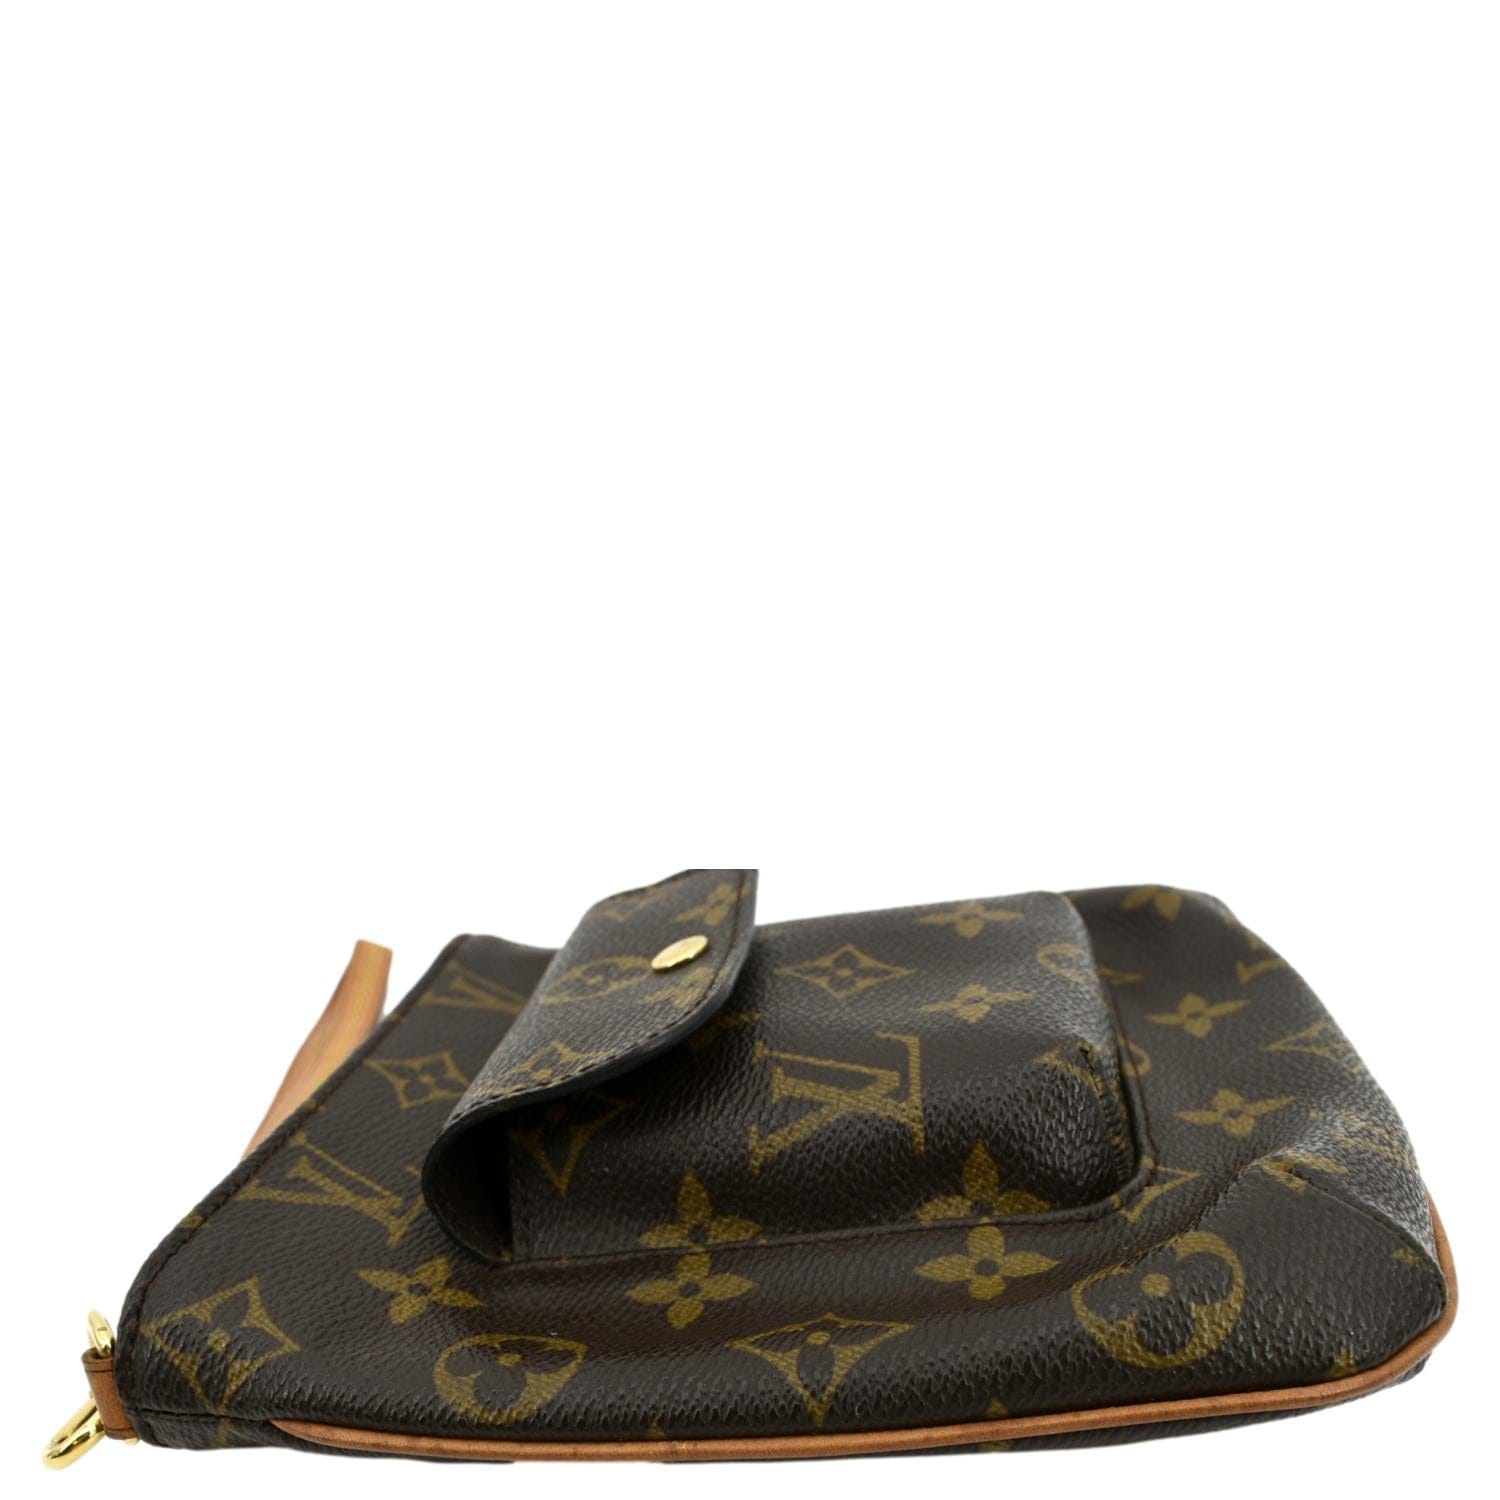 Shop for Louis Vuitton Monogram Canvas Leather Partition Wristlet Bag -  Shipped from USA